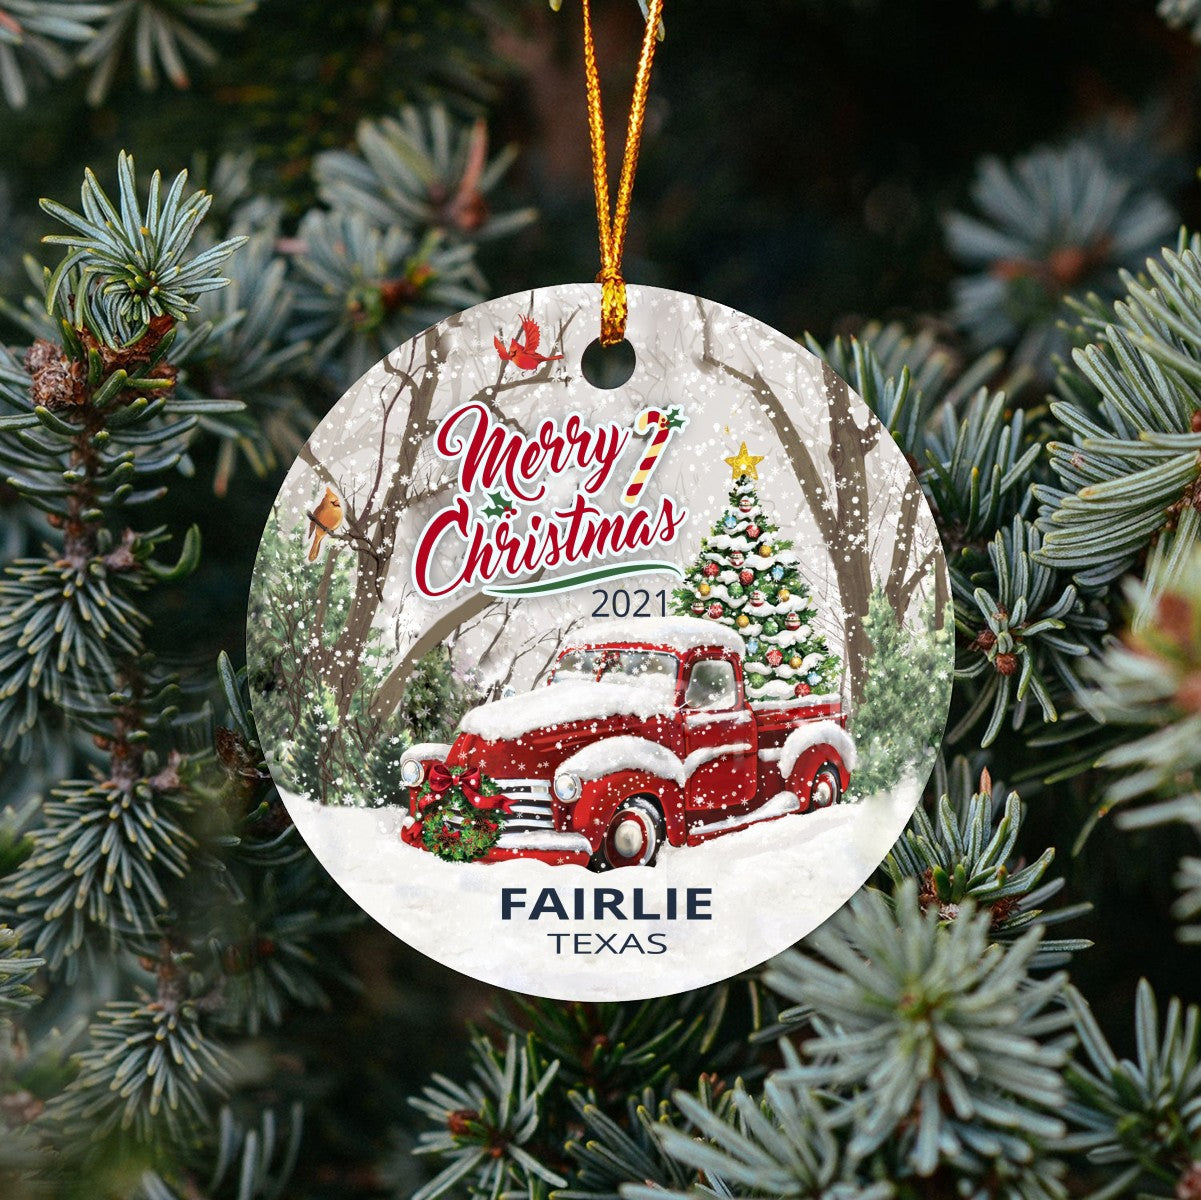 Christmas Tree Ornaments Fairlie - Ornament With Name City, State Fairlie Texas TX Ornament - Red Truck Xmas Ornaments 3'' Plastic Gift For Family, Friend And Housewarming